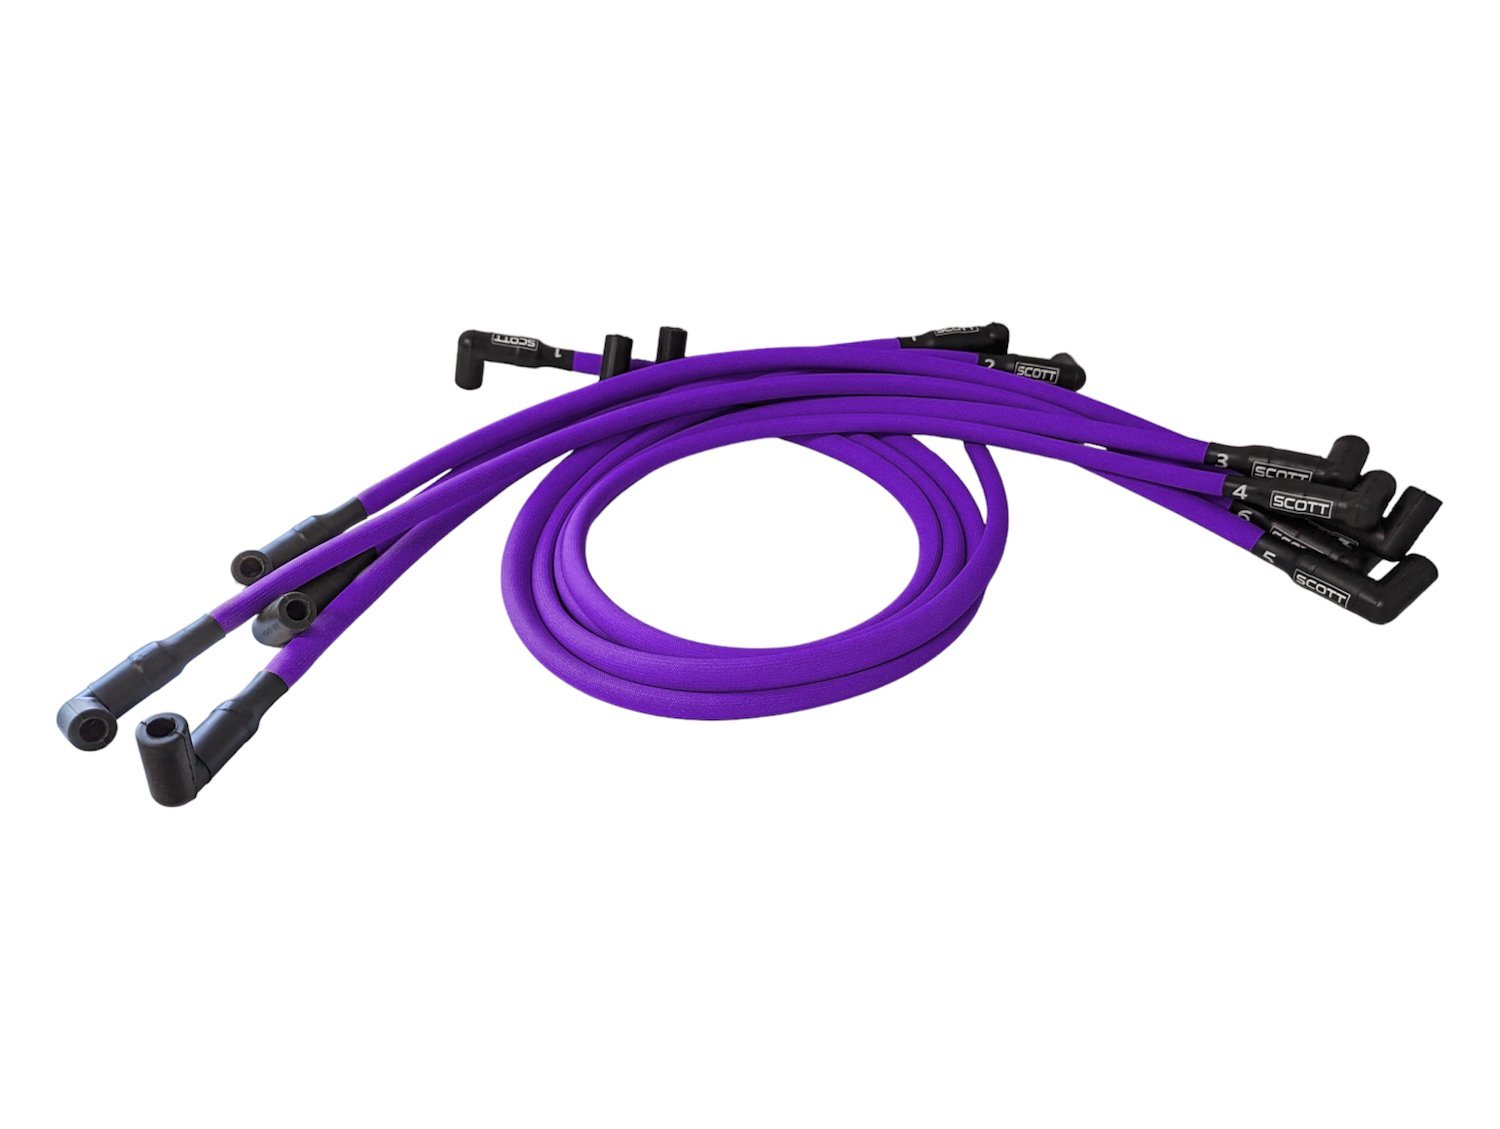 SPW-PS-530-7 High-Performance Fiberglass-Oversleeved Spark Plug Wire Set for Big Block Ford Dragster, Under Header [Purple]